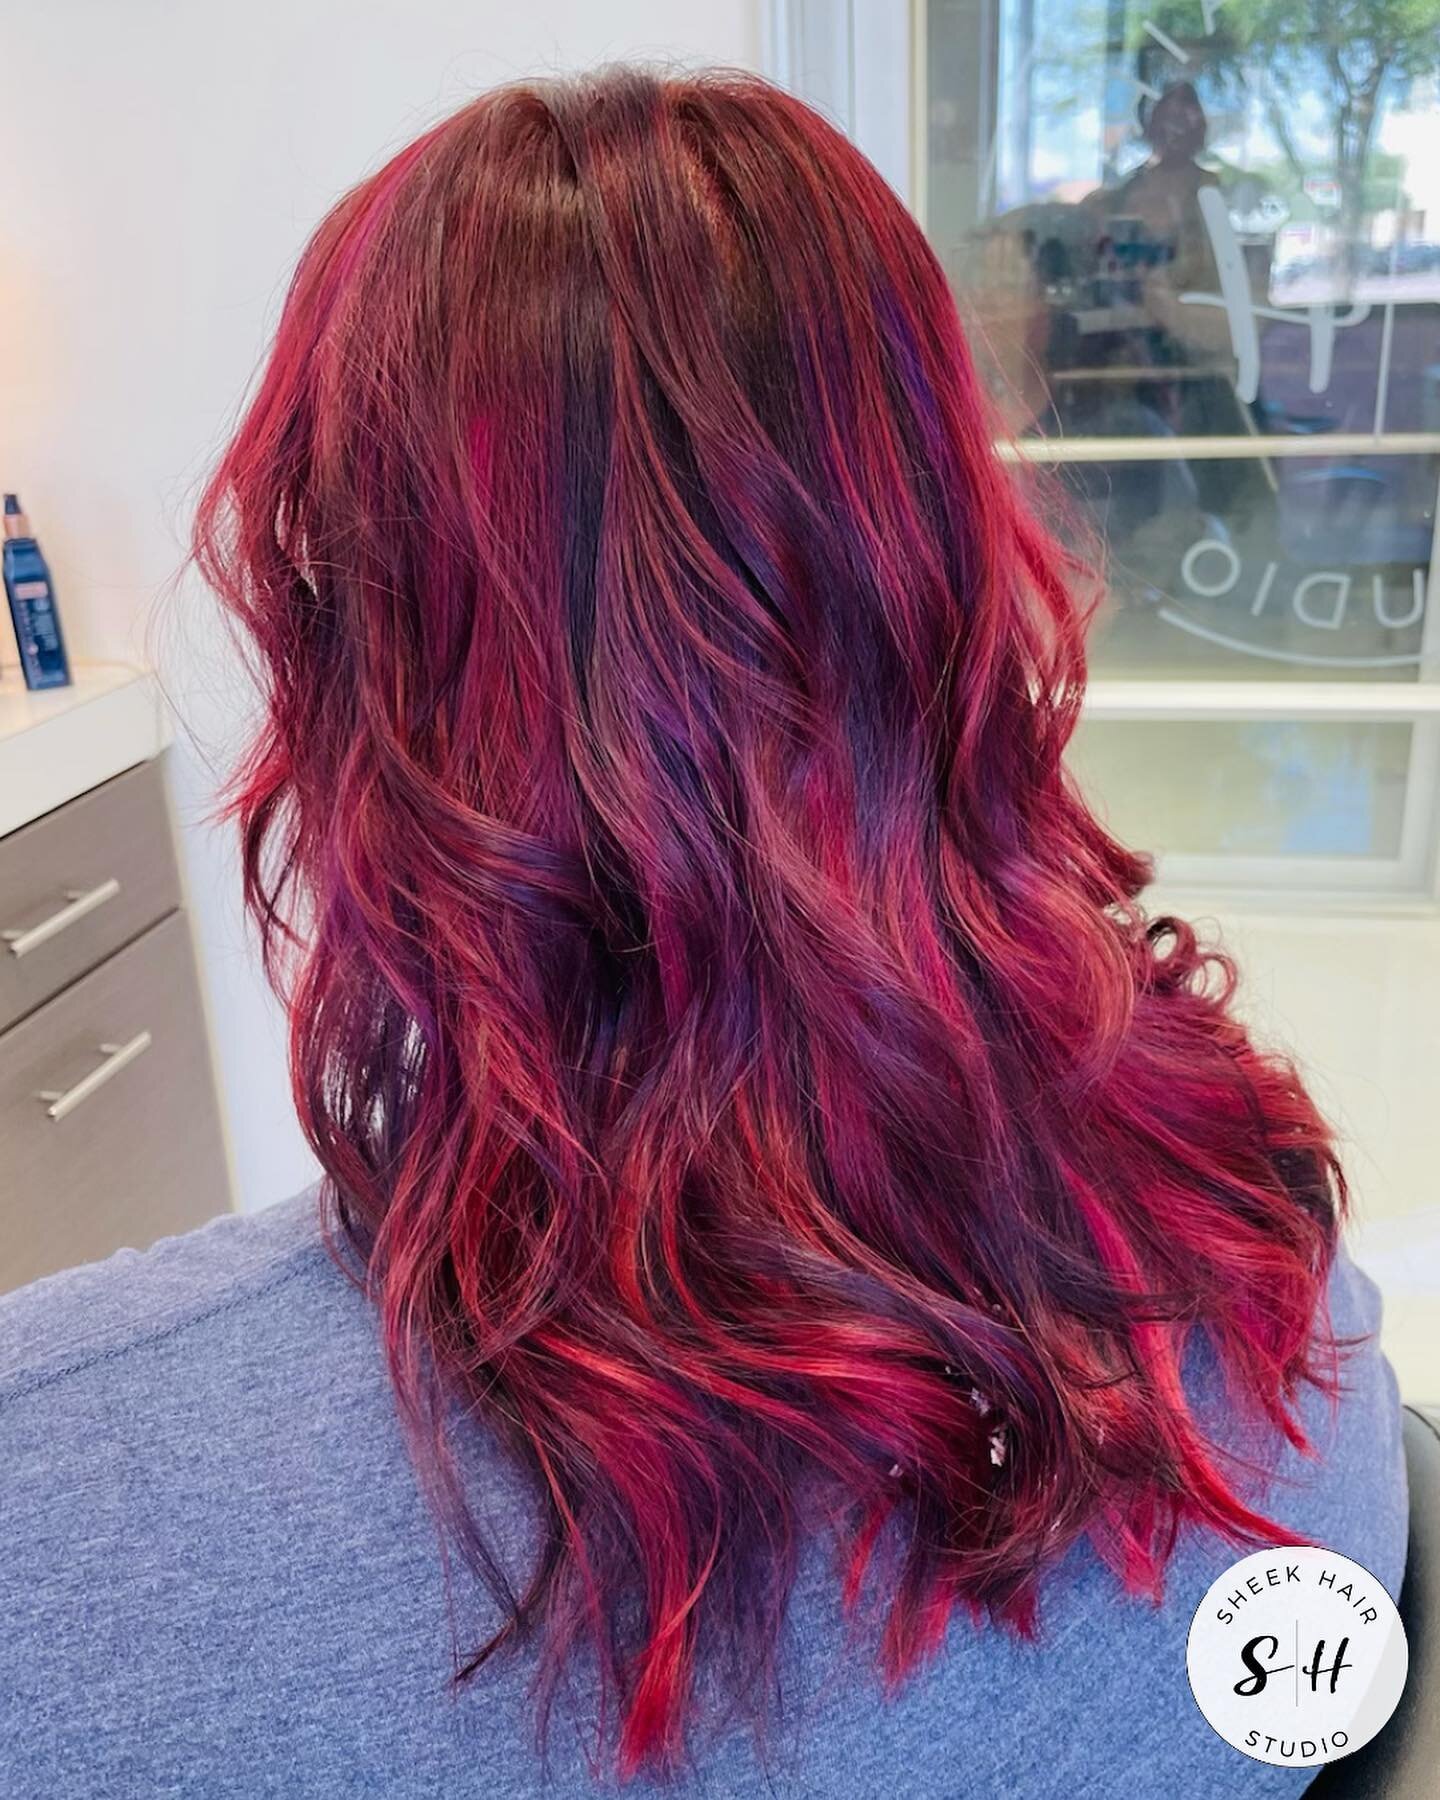 Did you know that natural red hair is the rarest in the world? That&rsquo;s why red hair dye will never go out of style. The color has so many shades and different nuances, and it can lend itself perfectly to your various personality traits &mdash; f